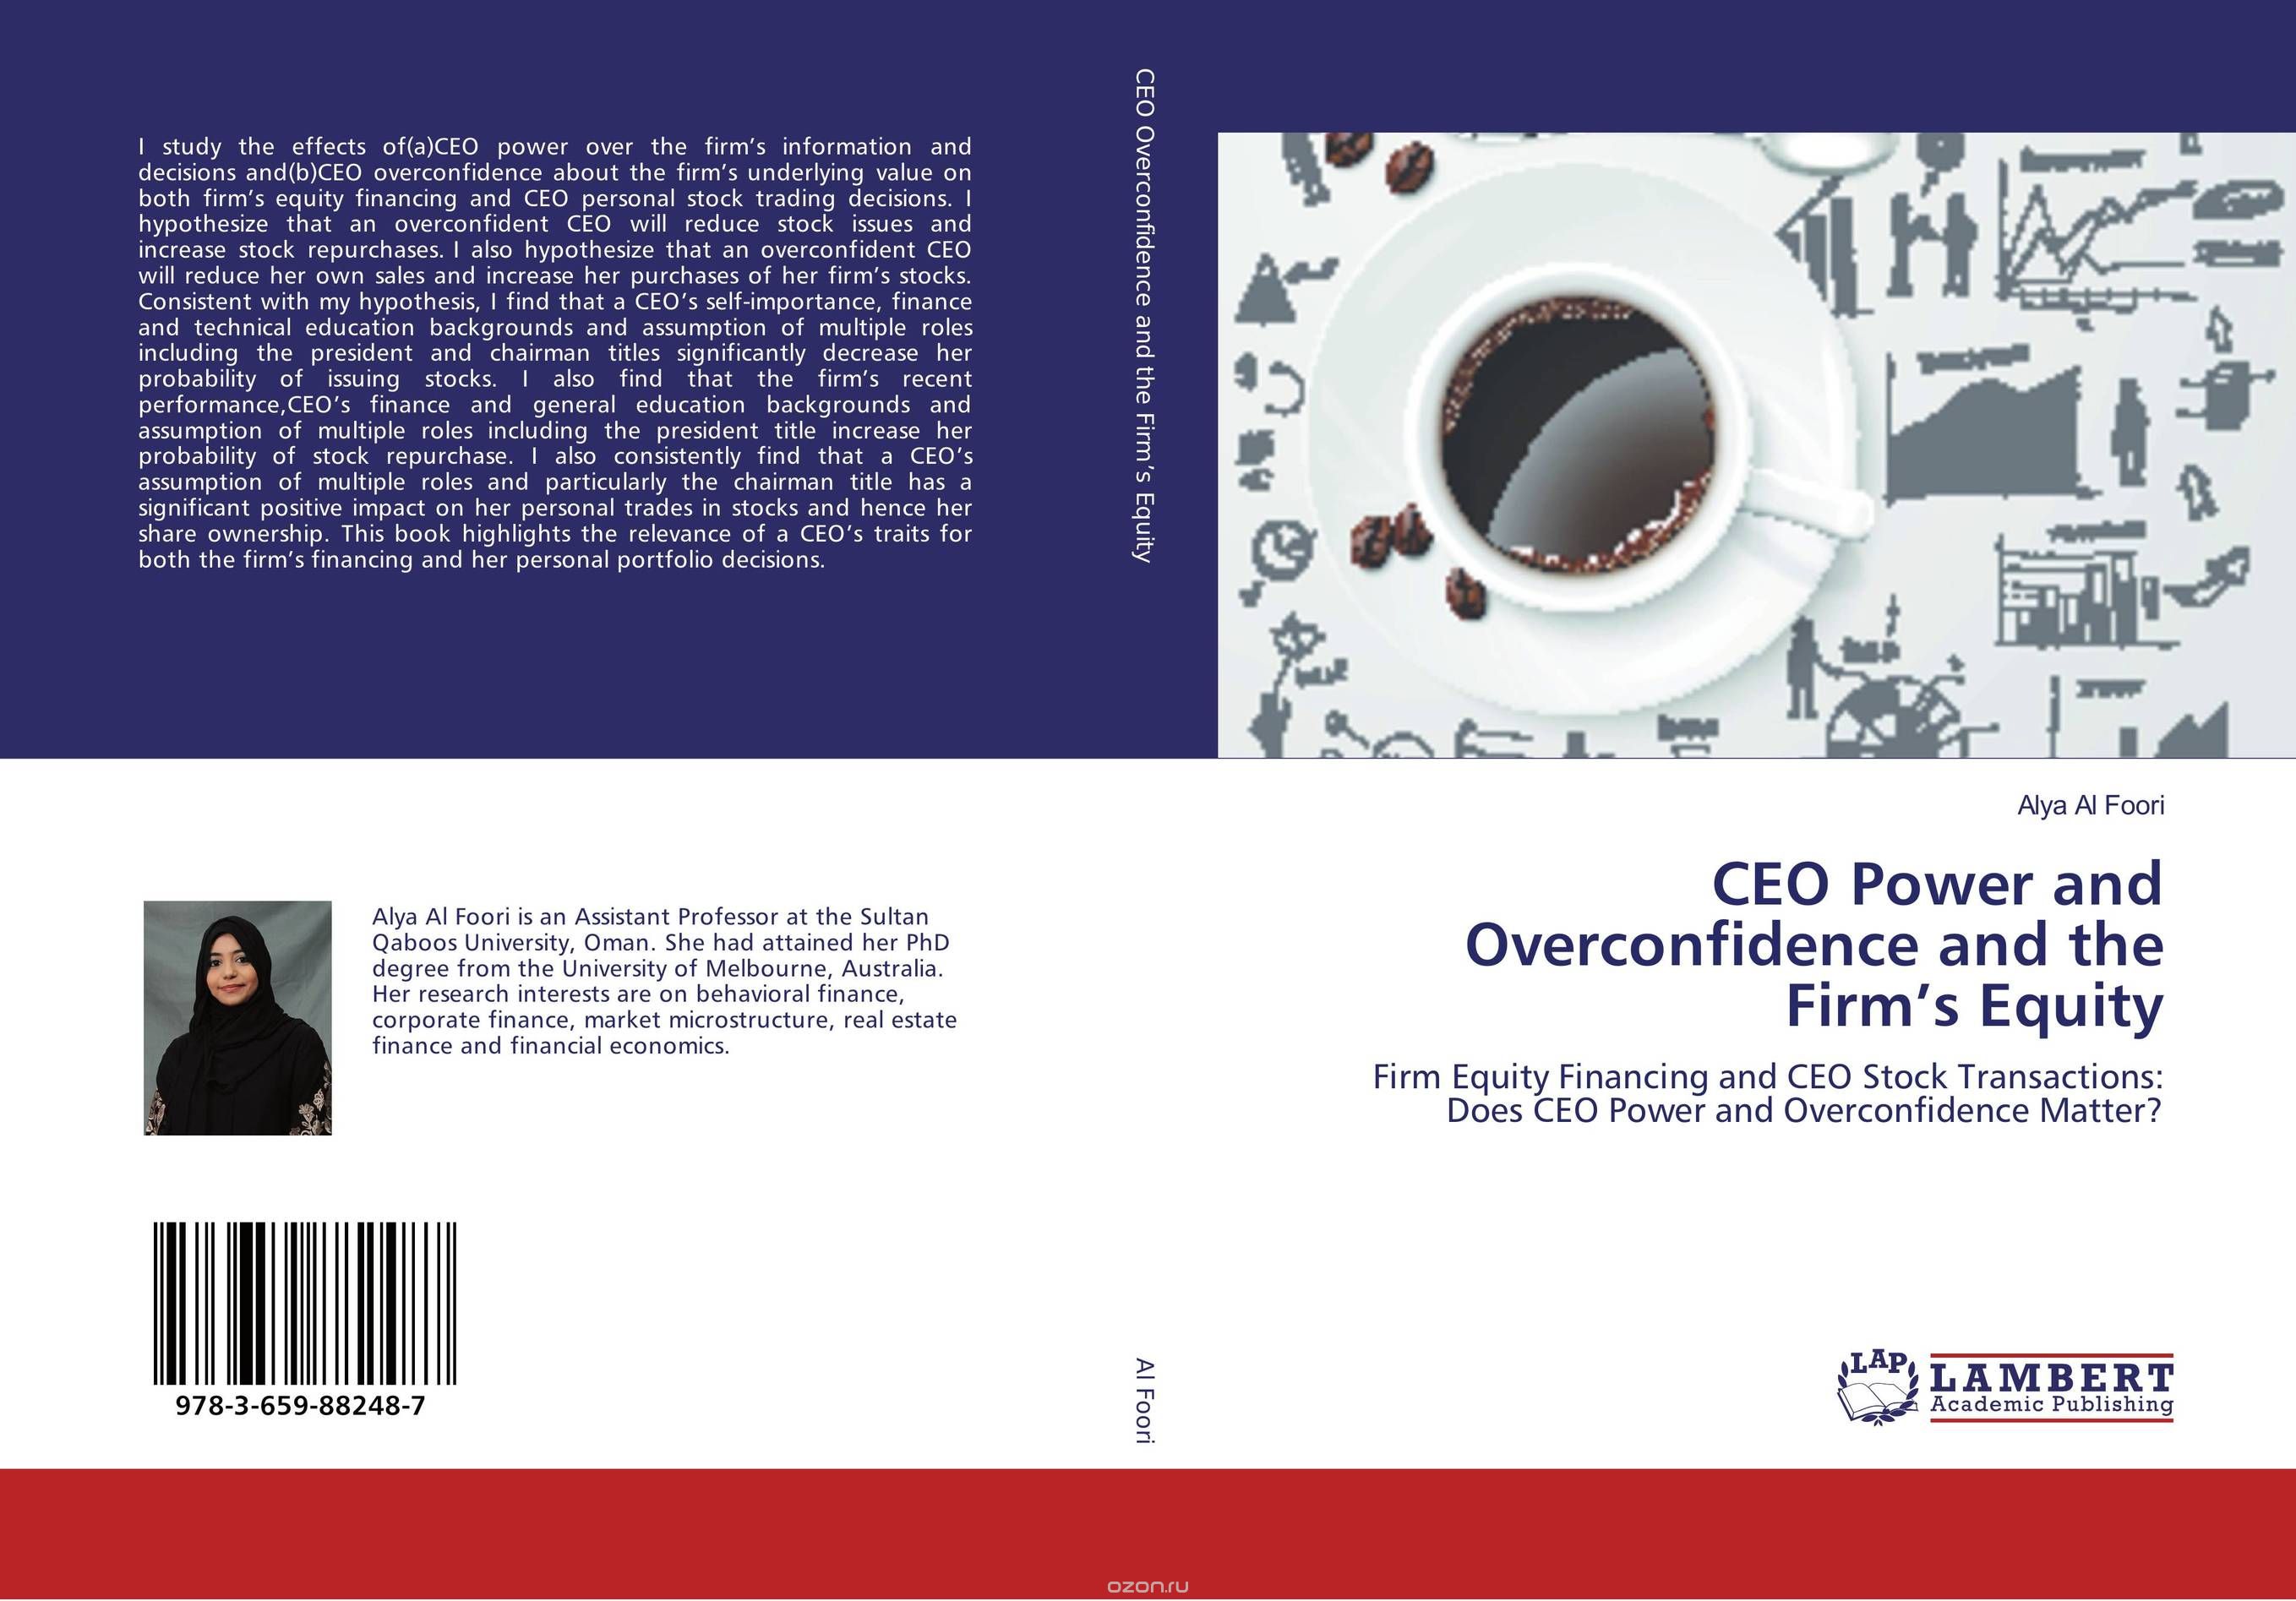 CEO Power and Overconfidence and the Firm’s Equity